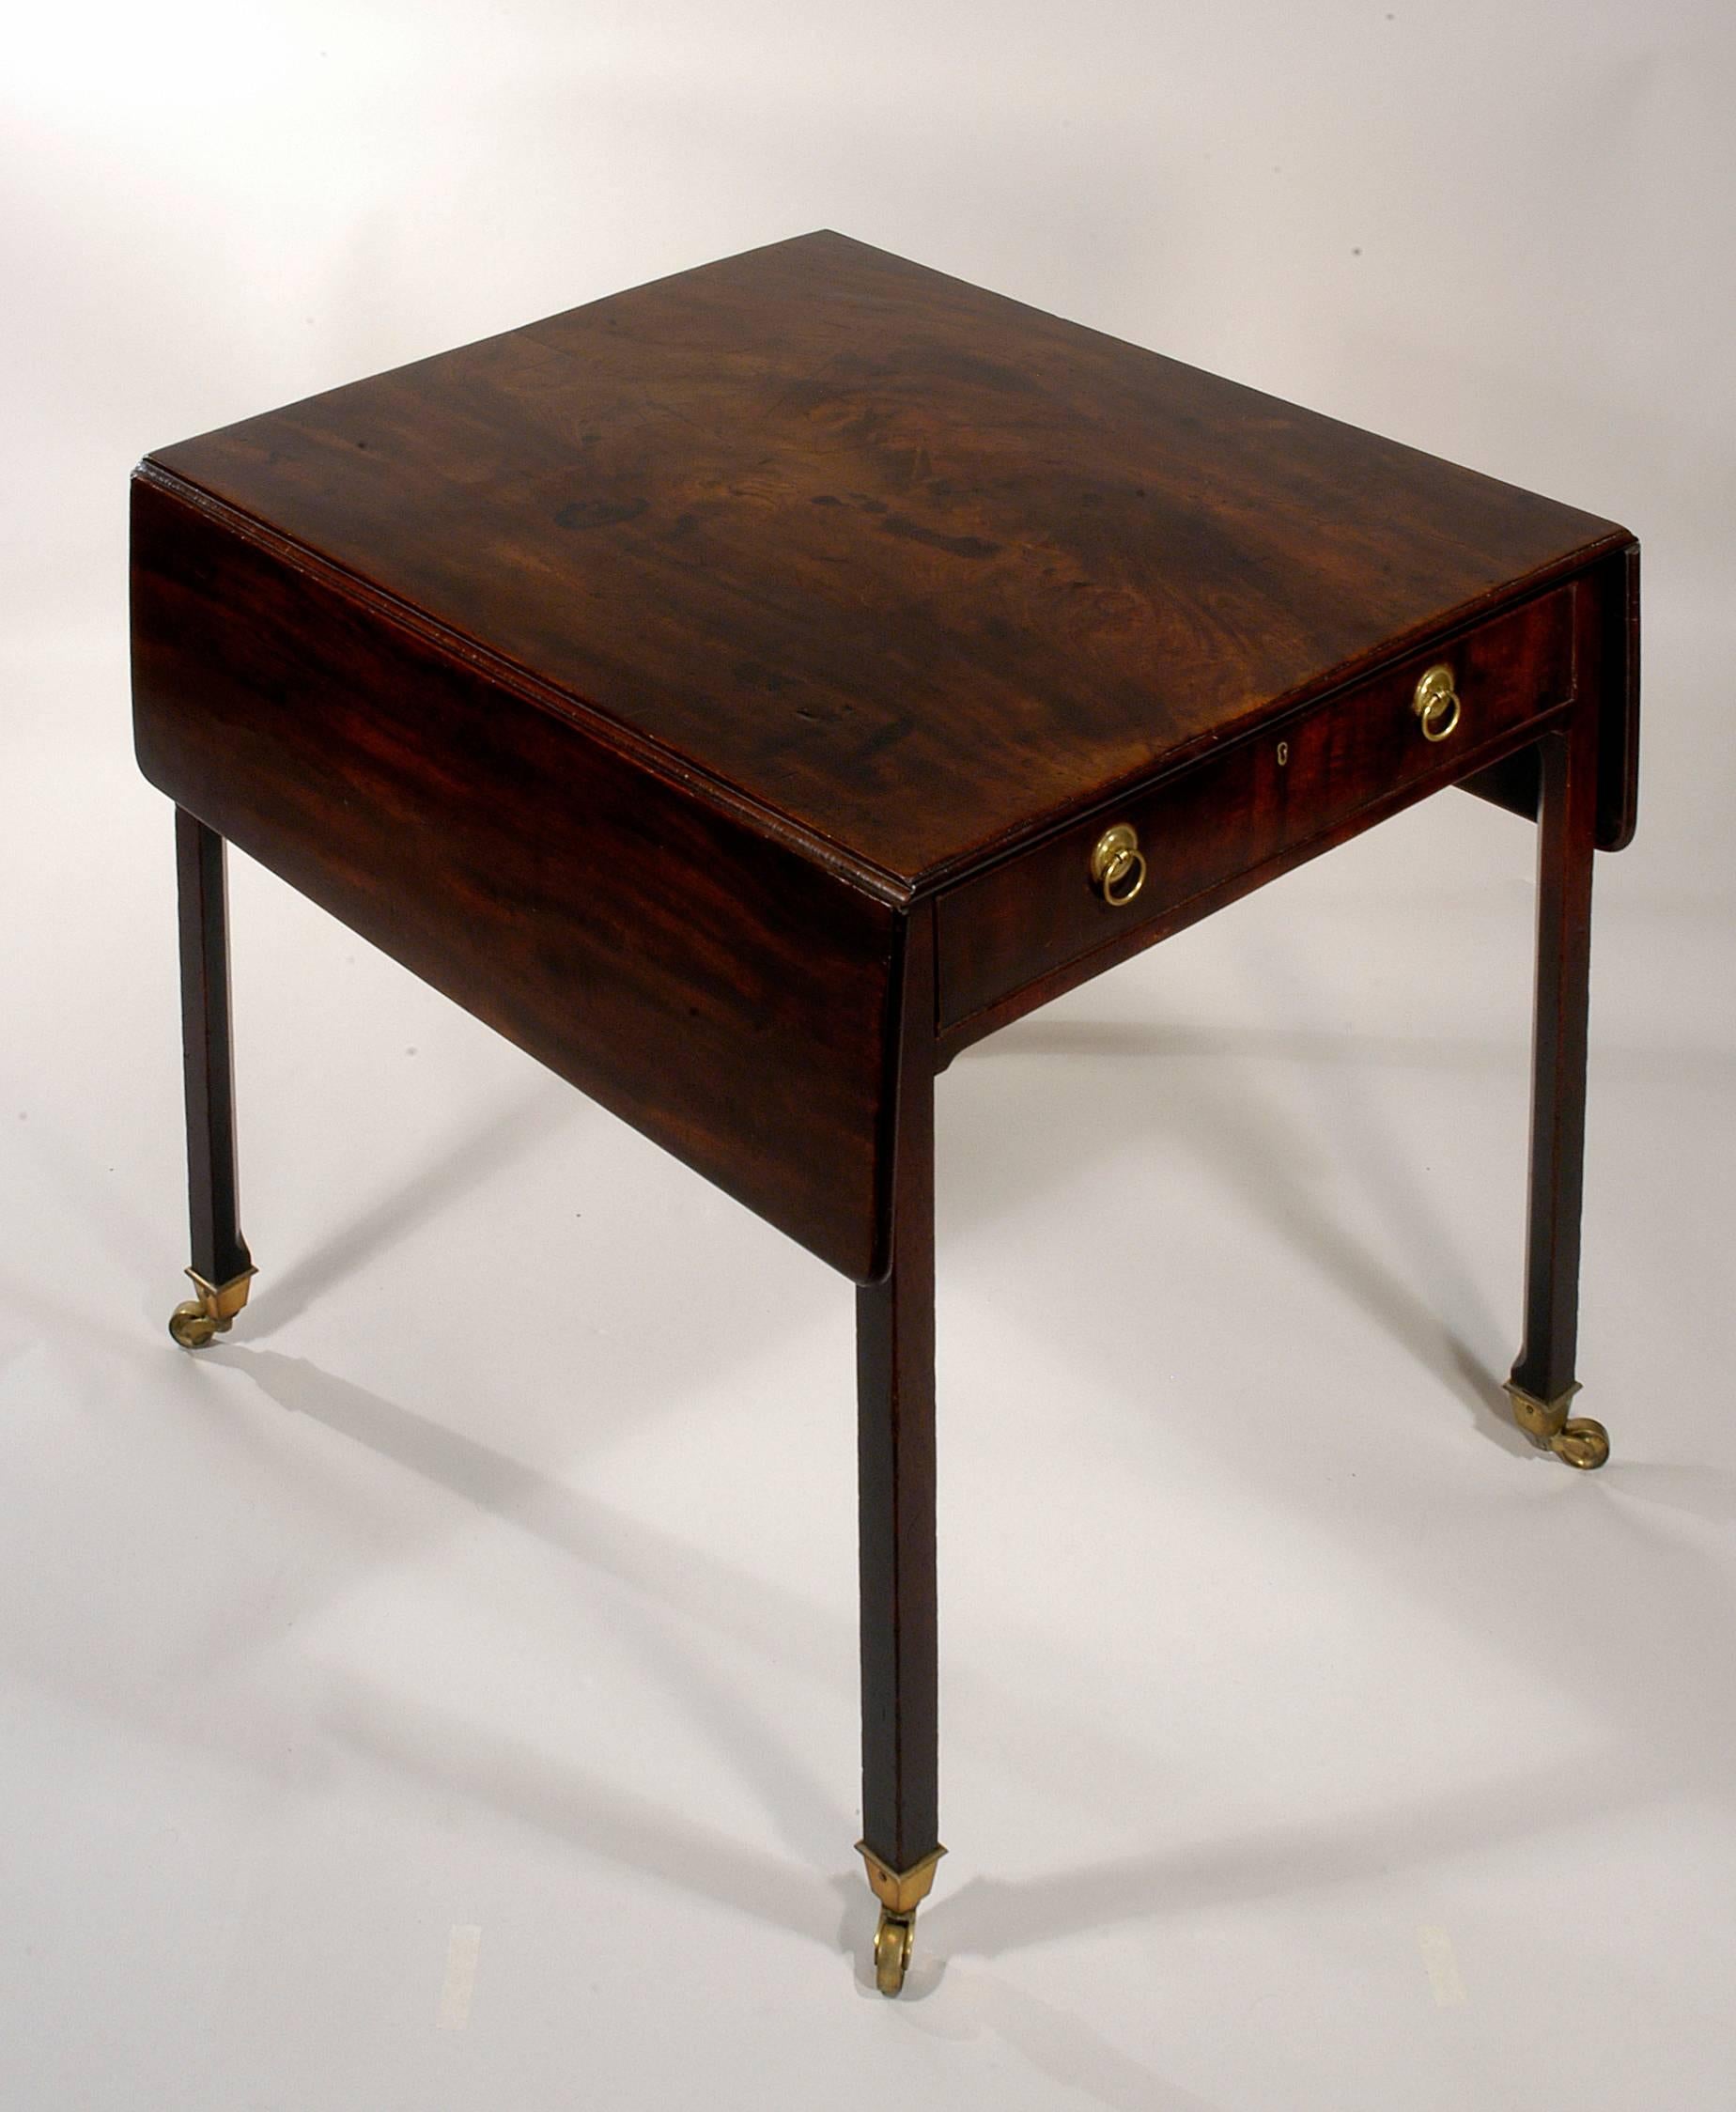 Mid-18th Century Chippendale Period Mahogany Rectangular Pembroke Table, English, circa 1760 For Sale